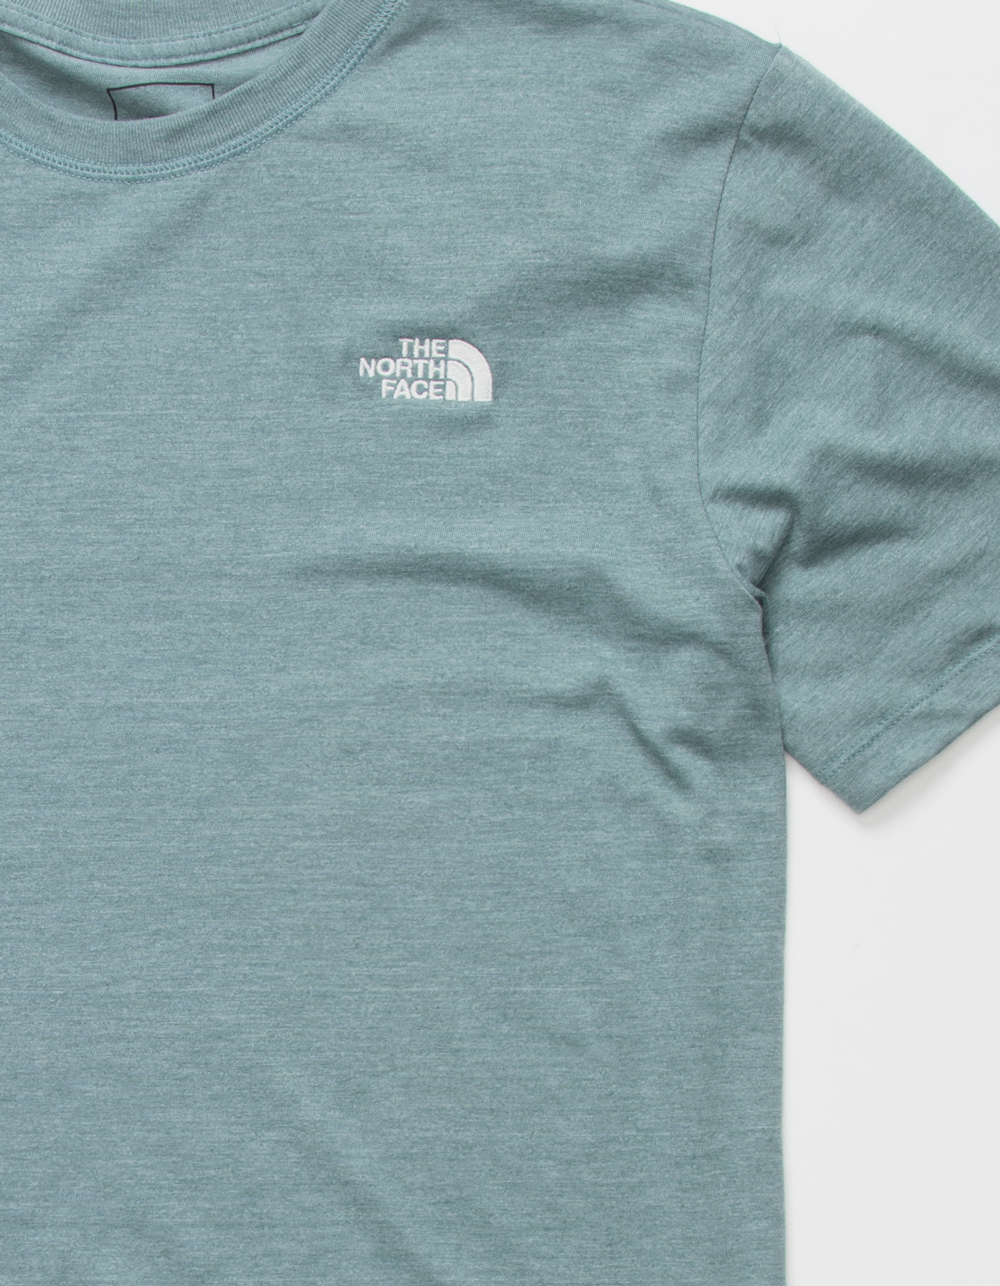 THE NORTH FACE Simple Logo Mens Tee - SLATE BLUE | Tillys